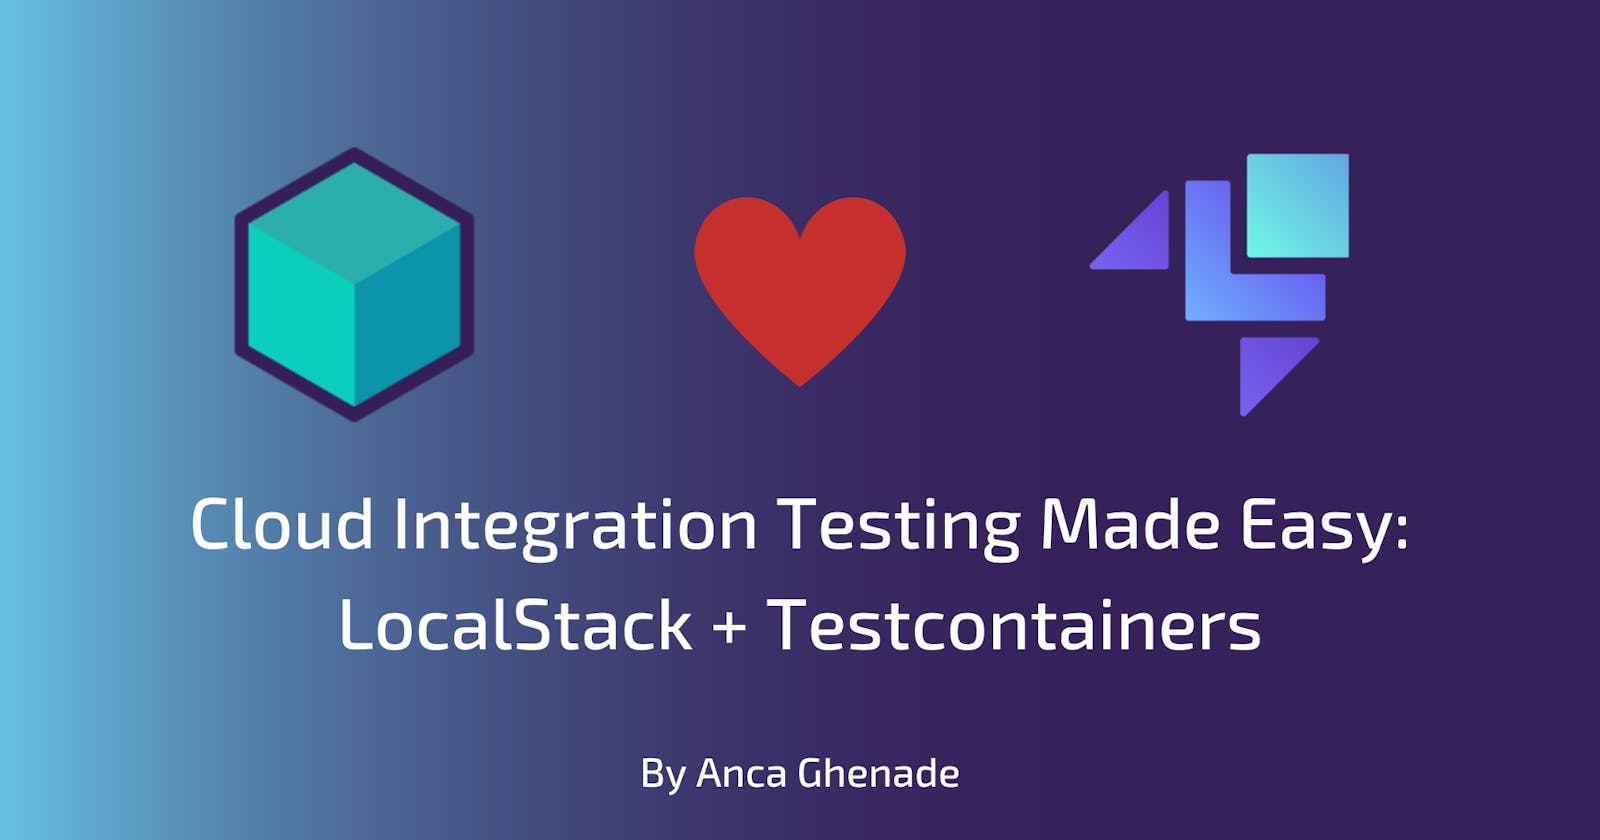 Cloud Integration Testing Made Easy: LocalStack + Testcontainers